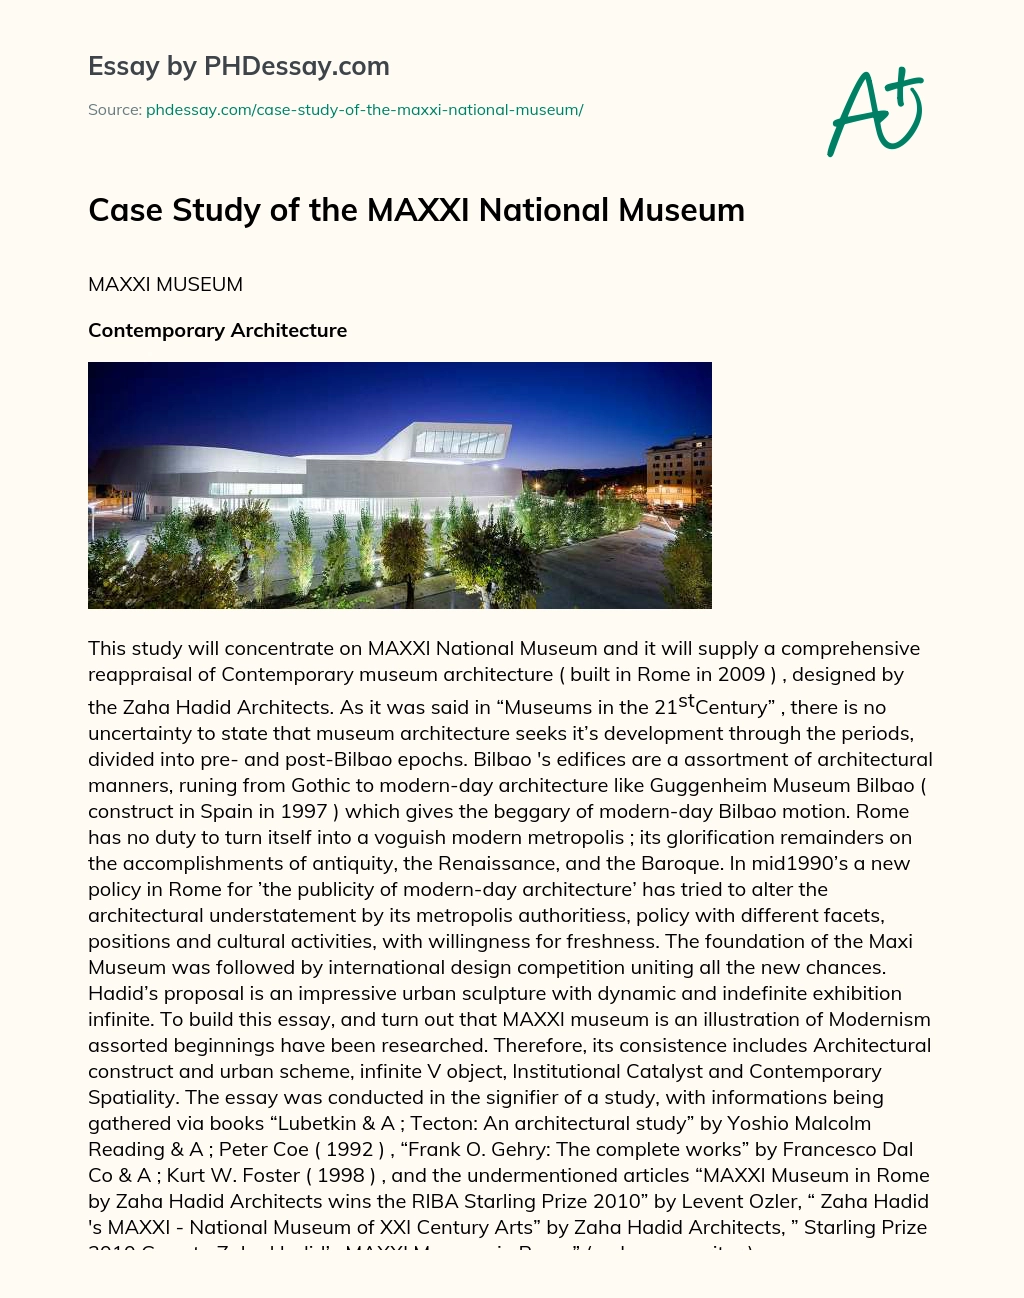 Case Study of the MAXXI National Museum essay